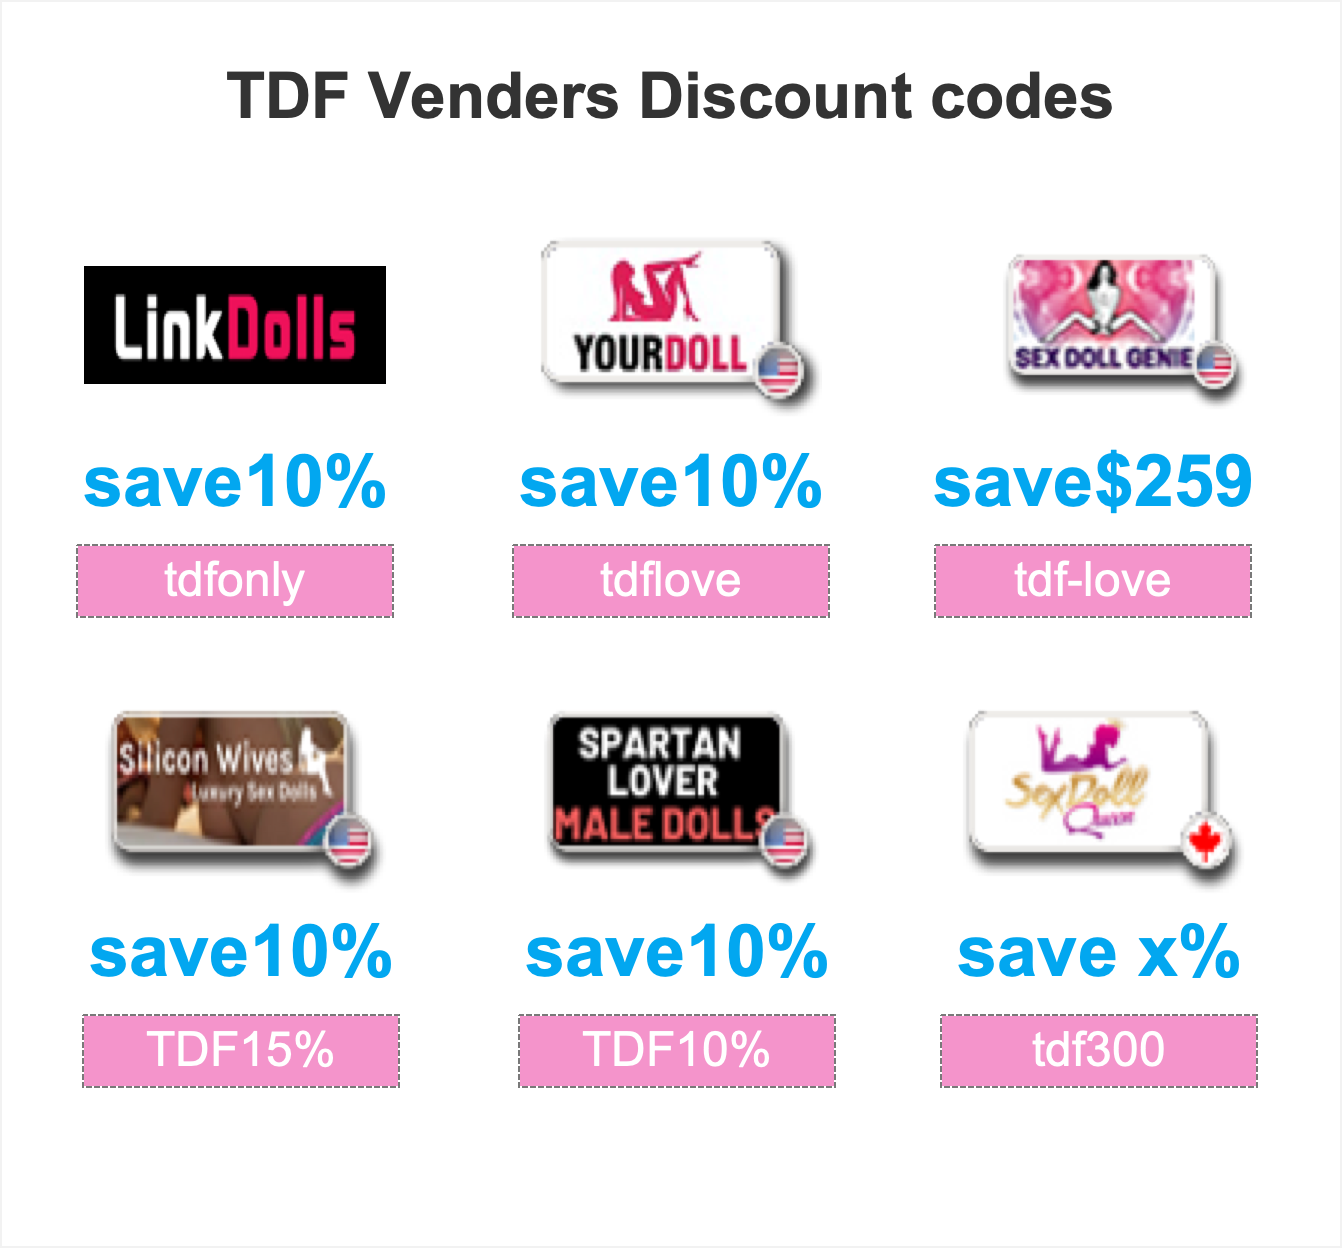 TDF Venders Discount codes Summary (updating) pic